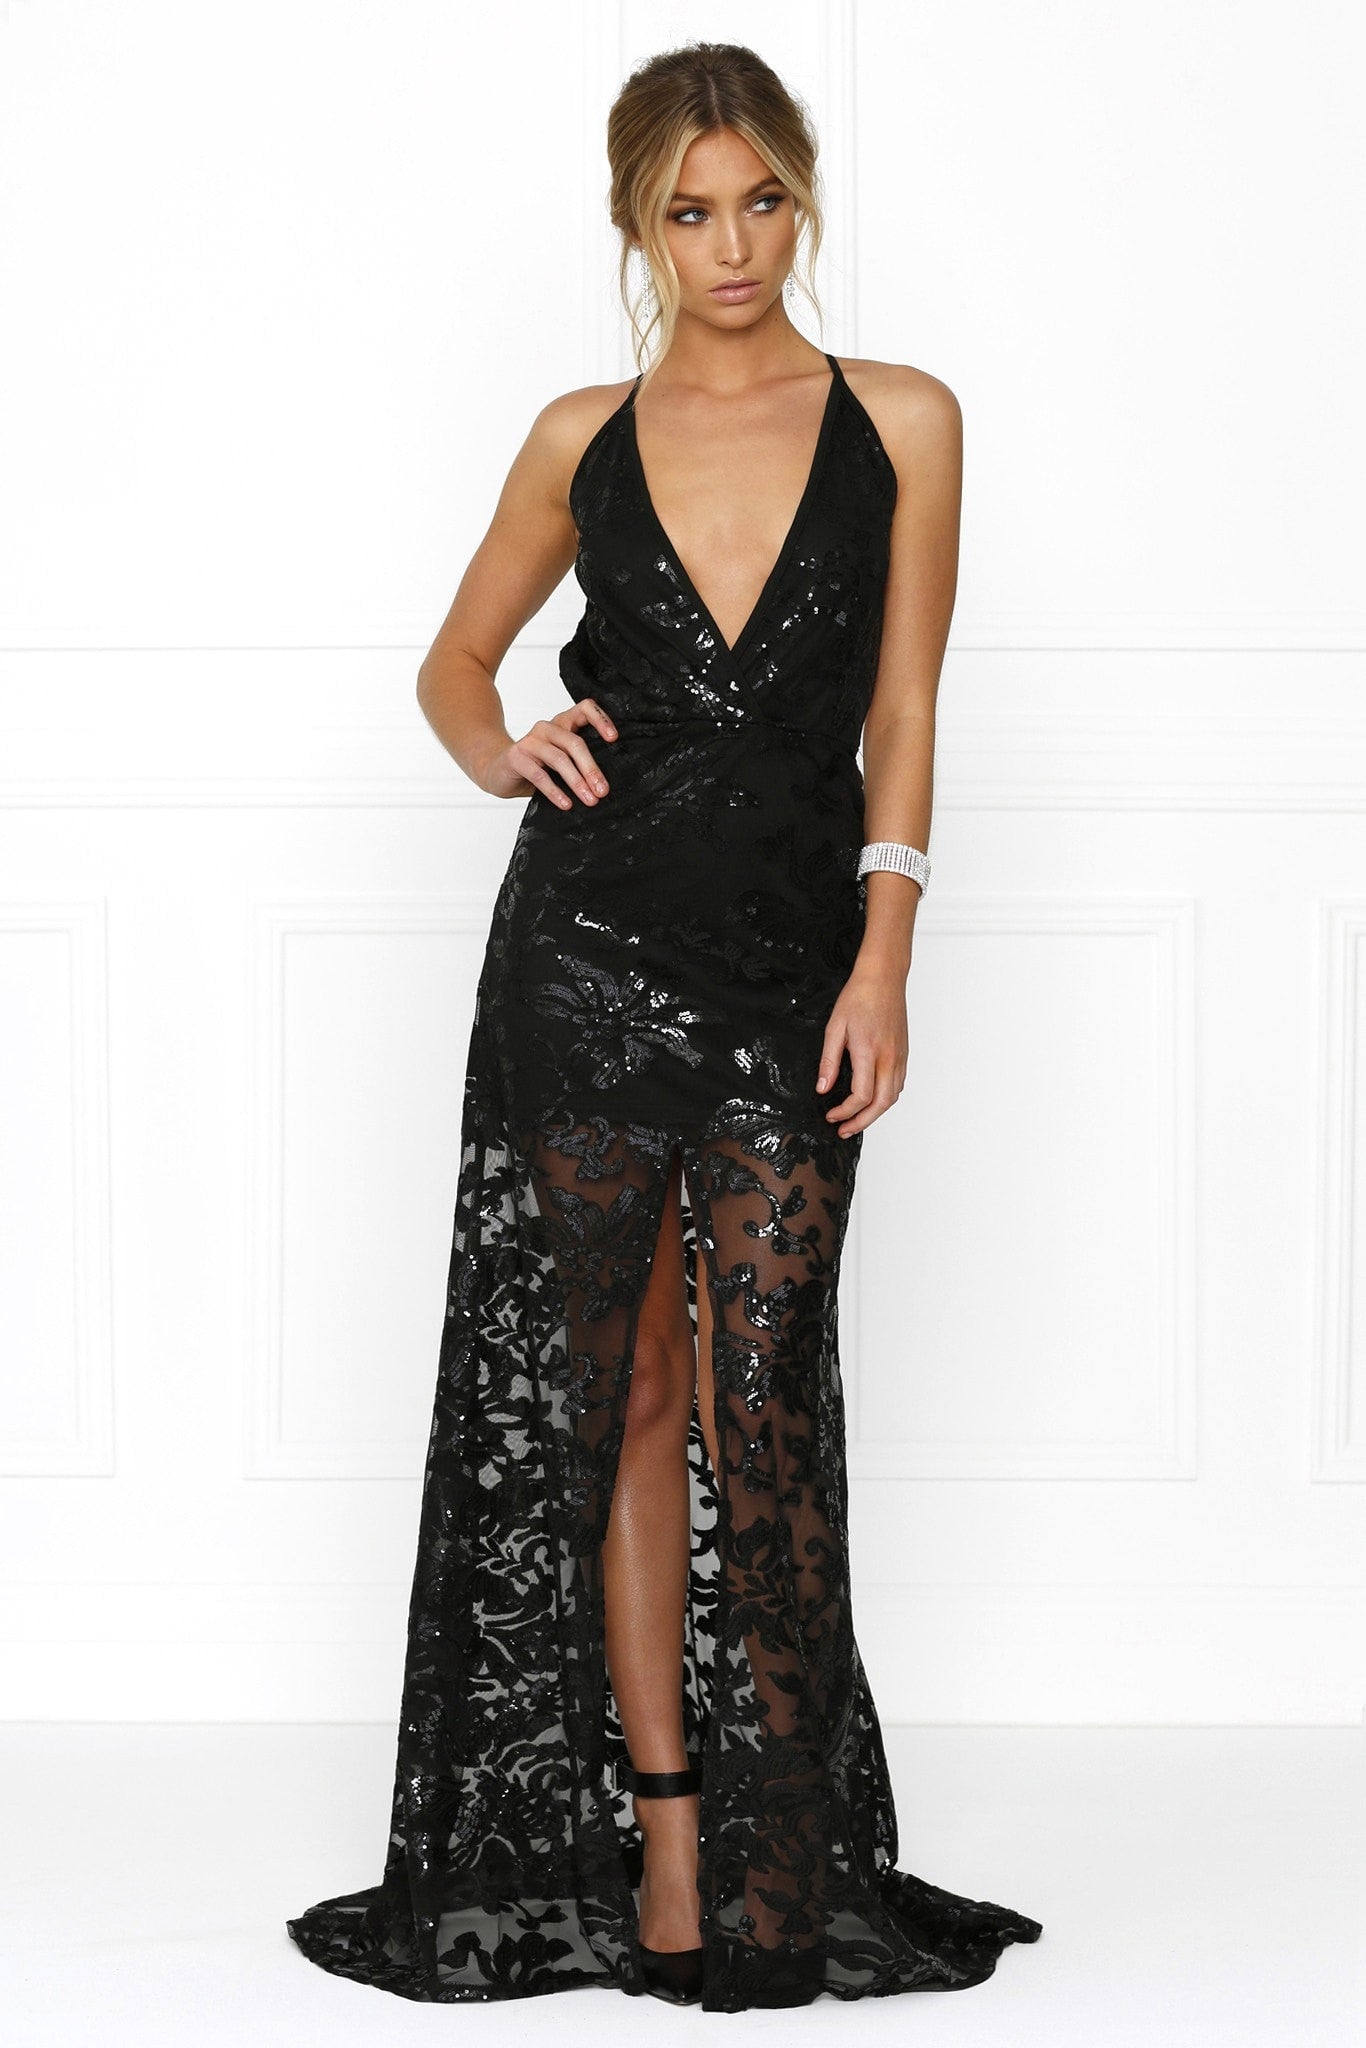 Honey Couture RENAE Black Sheer Lined Floral Print w Split Evening Gown Dress Honey Couture$ AfterPay Humm ZipPay LayBuy Sezzle